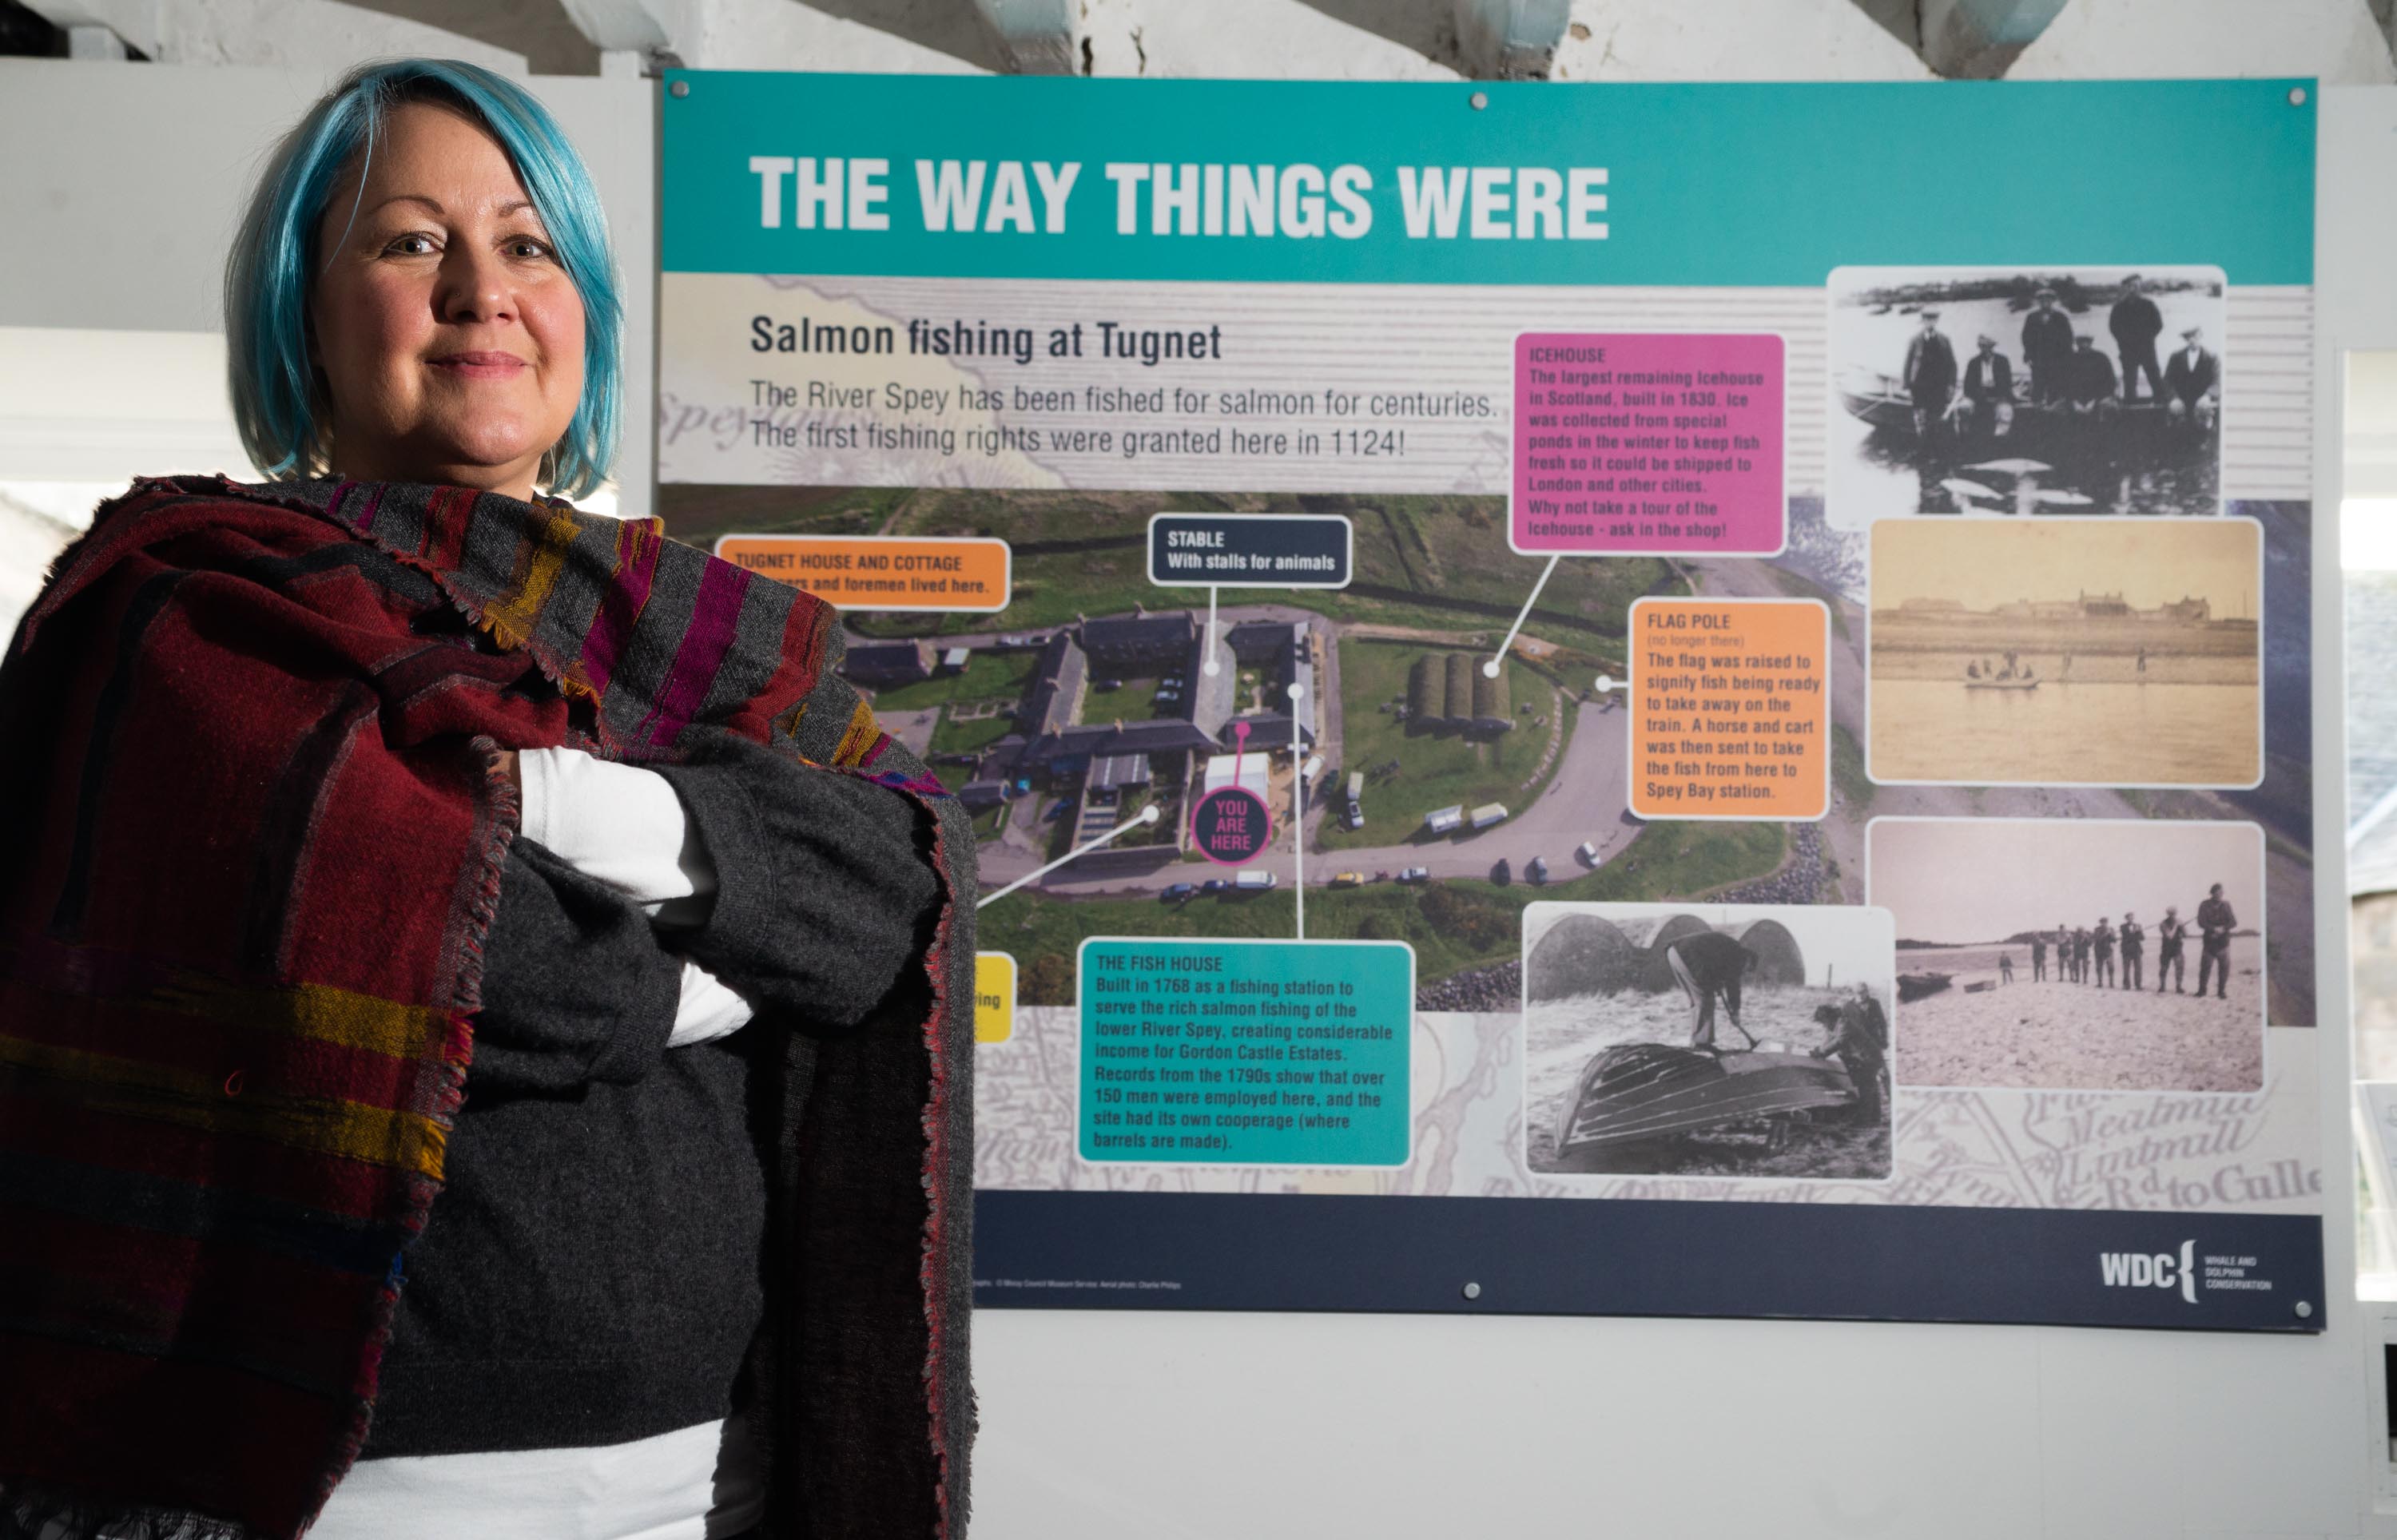 New information boards have been unveiled at the Scottish Dolphin Centre at Spey Bay. Pictured: SDC officer Lisa Farley.